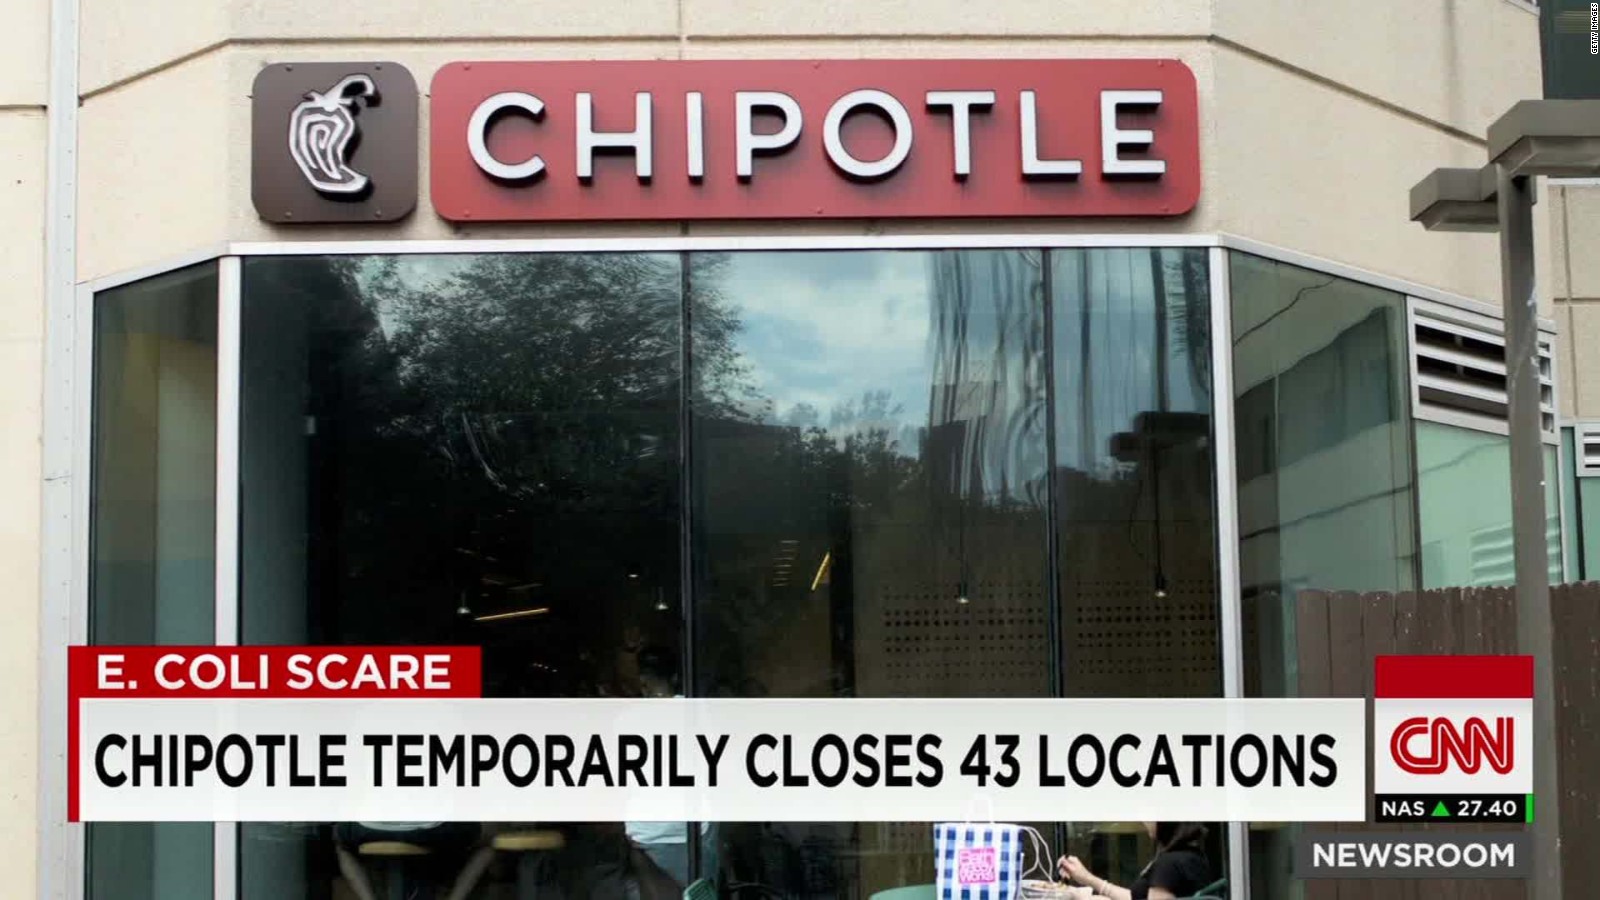 Boston College Students sick after eating at Chipotle CNN